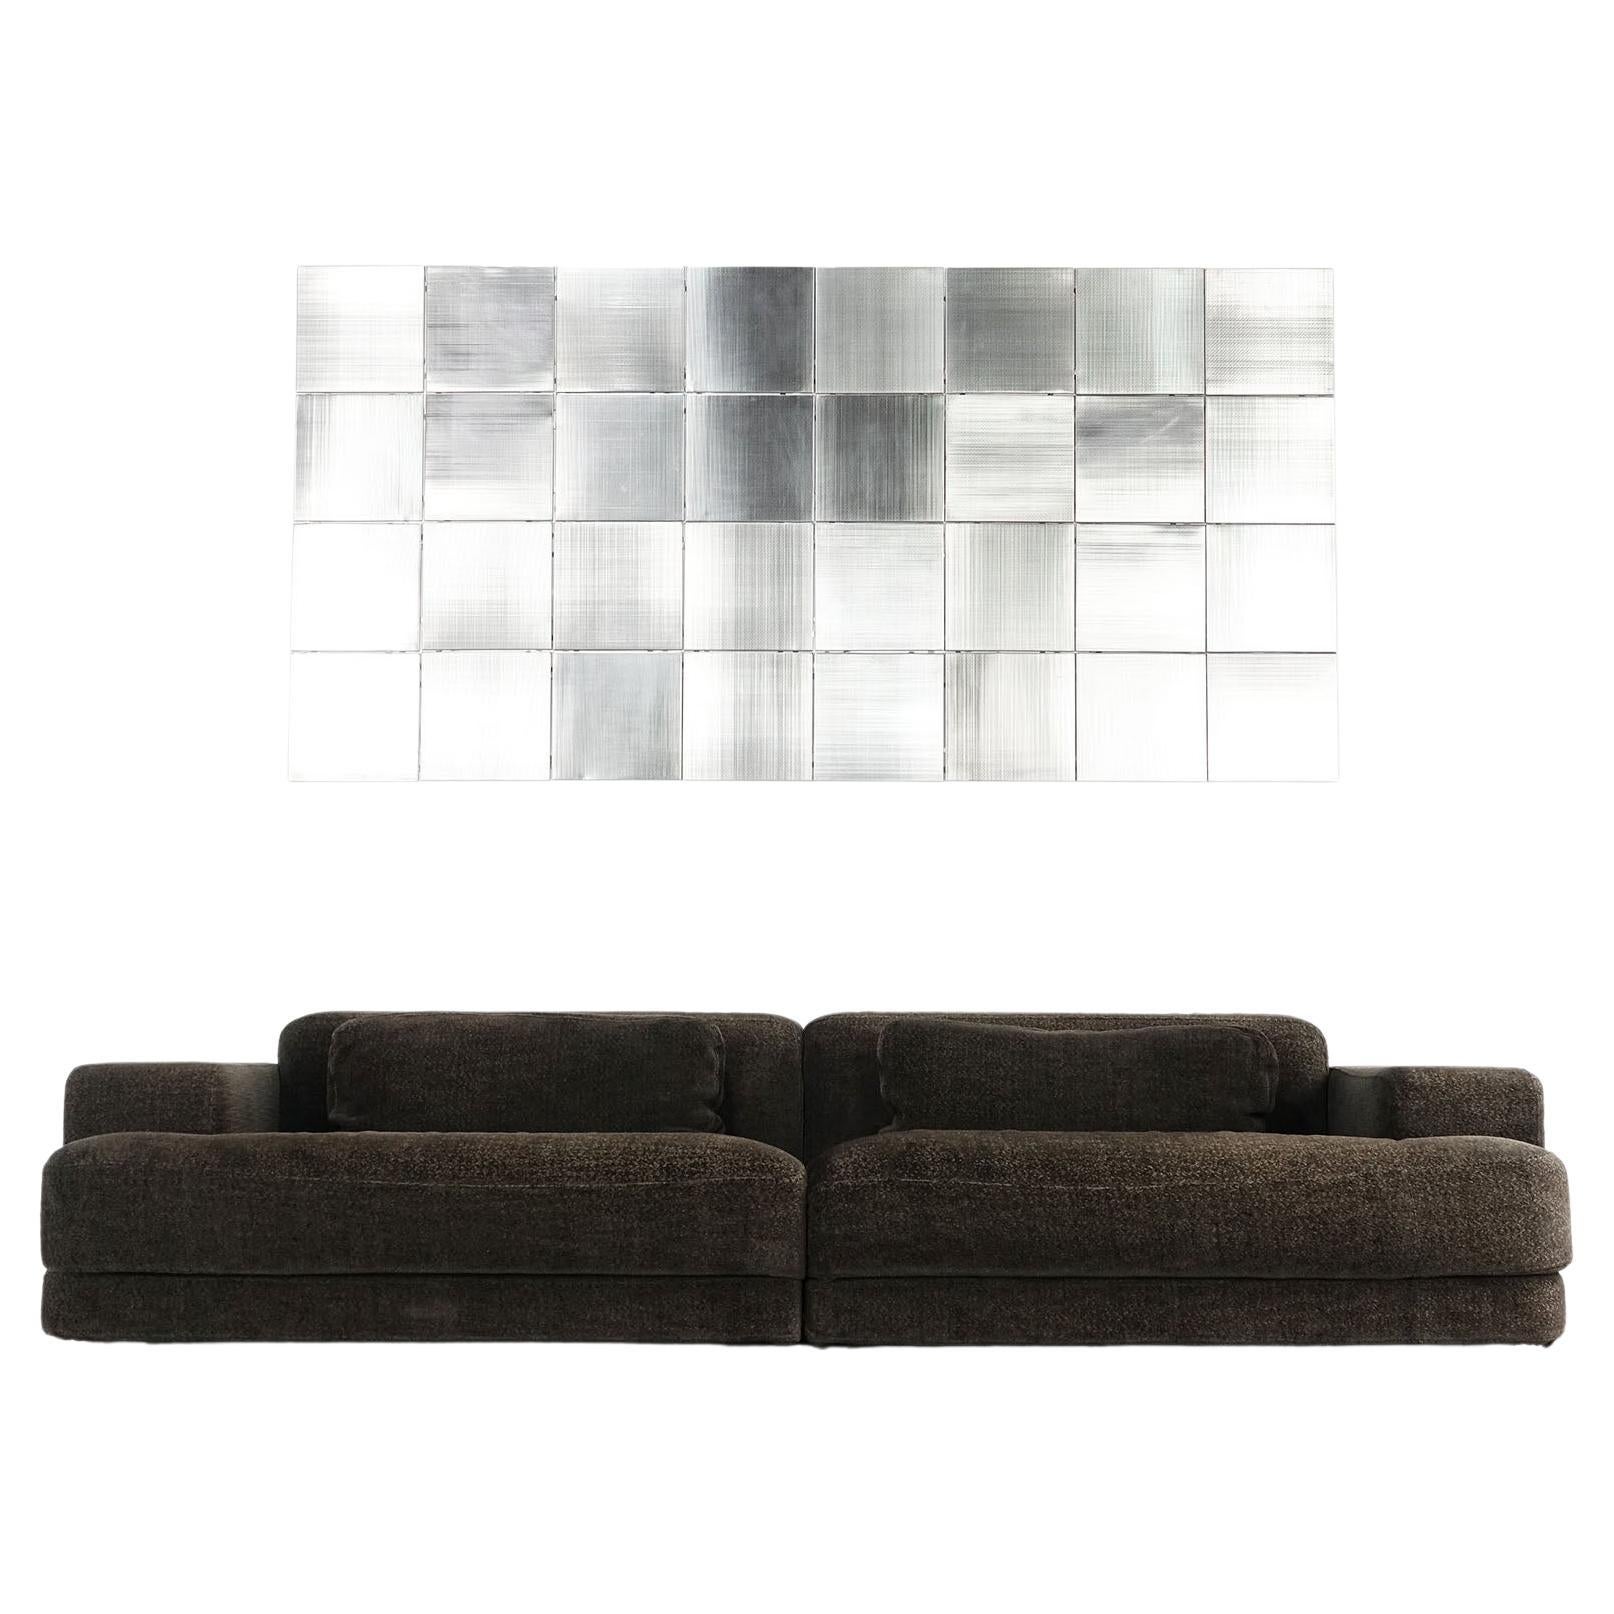 Extraordinary extra large sofa design Pier Luigi Frighetto by Black Tie 

Upholstery in high density polyurethane foam, cover in thermal bonded fiber with stretch jersey. Seat cushion in 100% European goose feathers. Fully removable fabric covers.